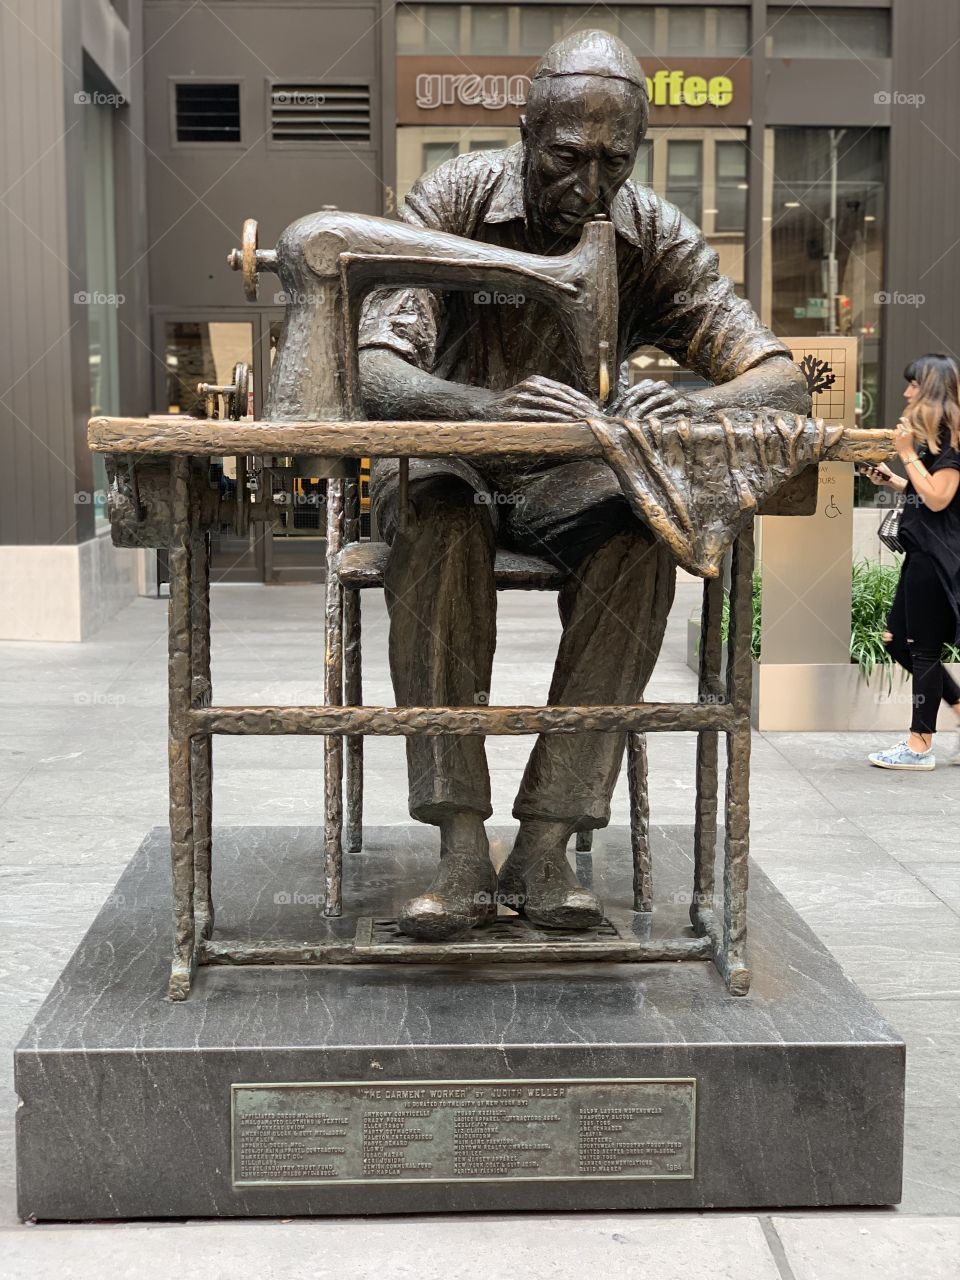 Statue of man sewing in NYC fashions district 